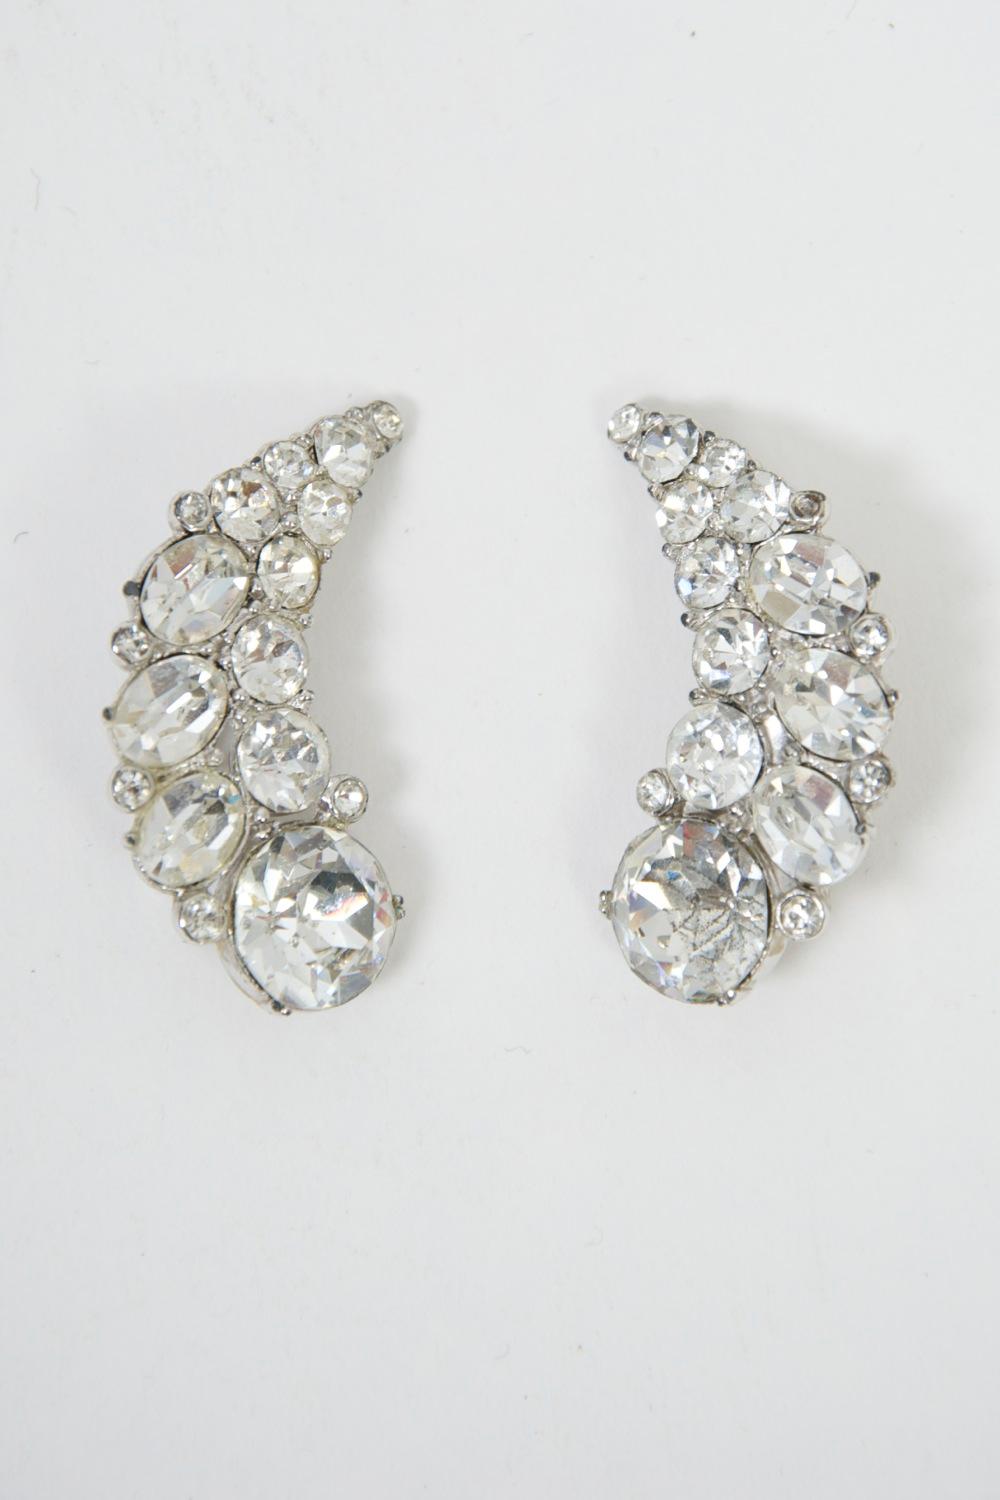 Rhinestone Crescent Earrings In Good Condition For Sale In Alford, MA